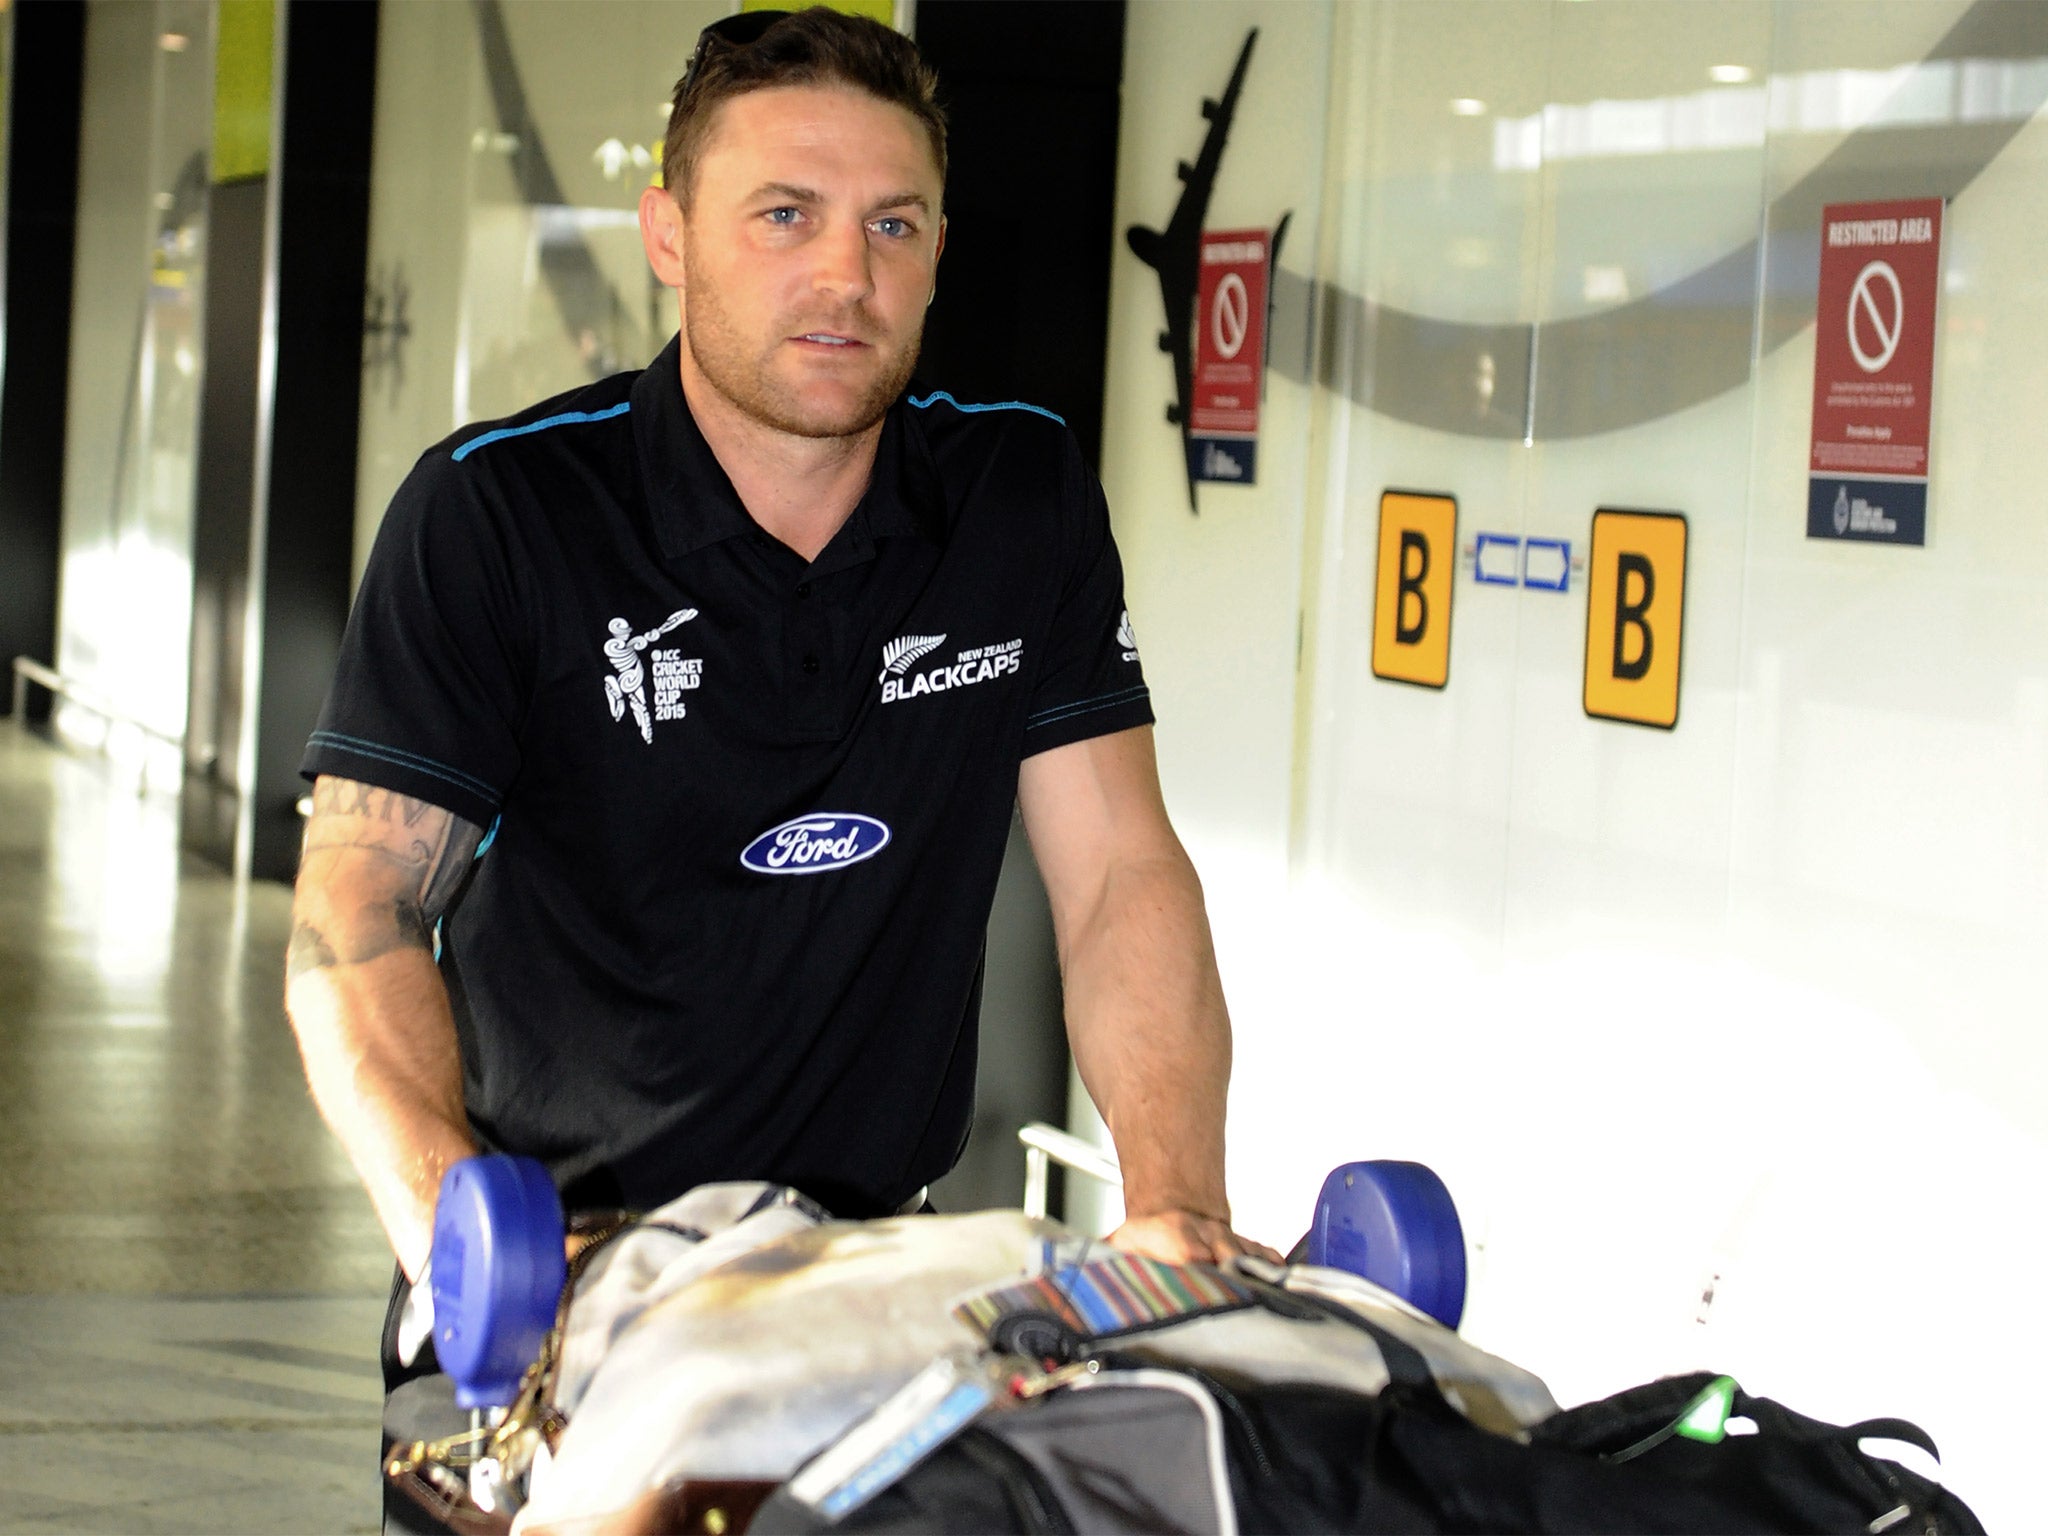 New Zealand captain Brendon McCullum arrives in Melbourne for the World Cup final